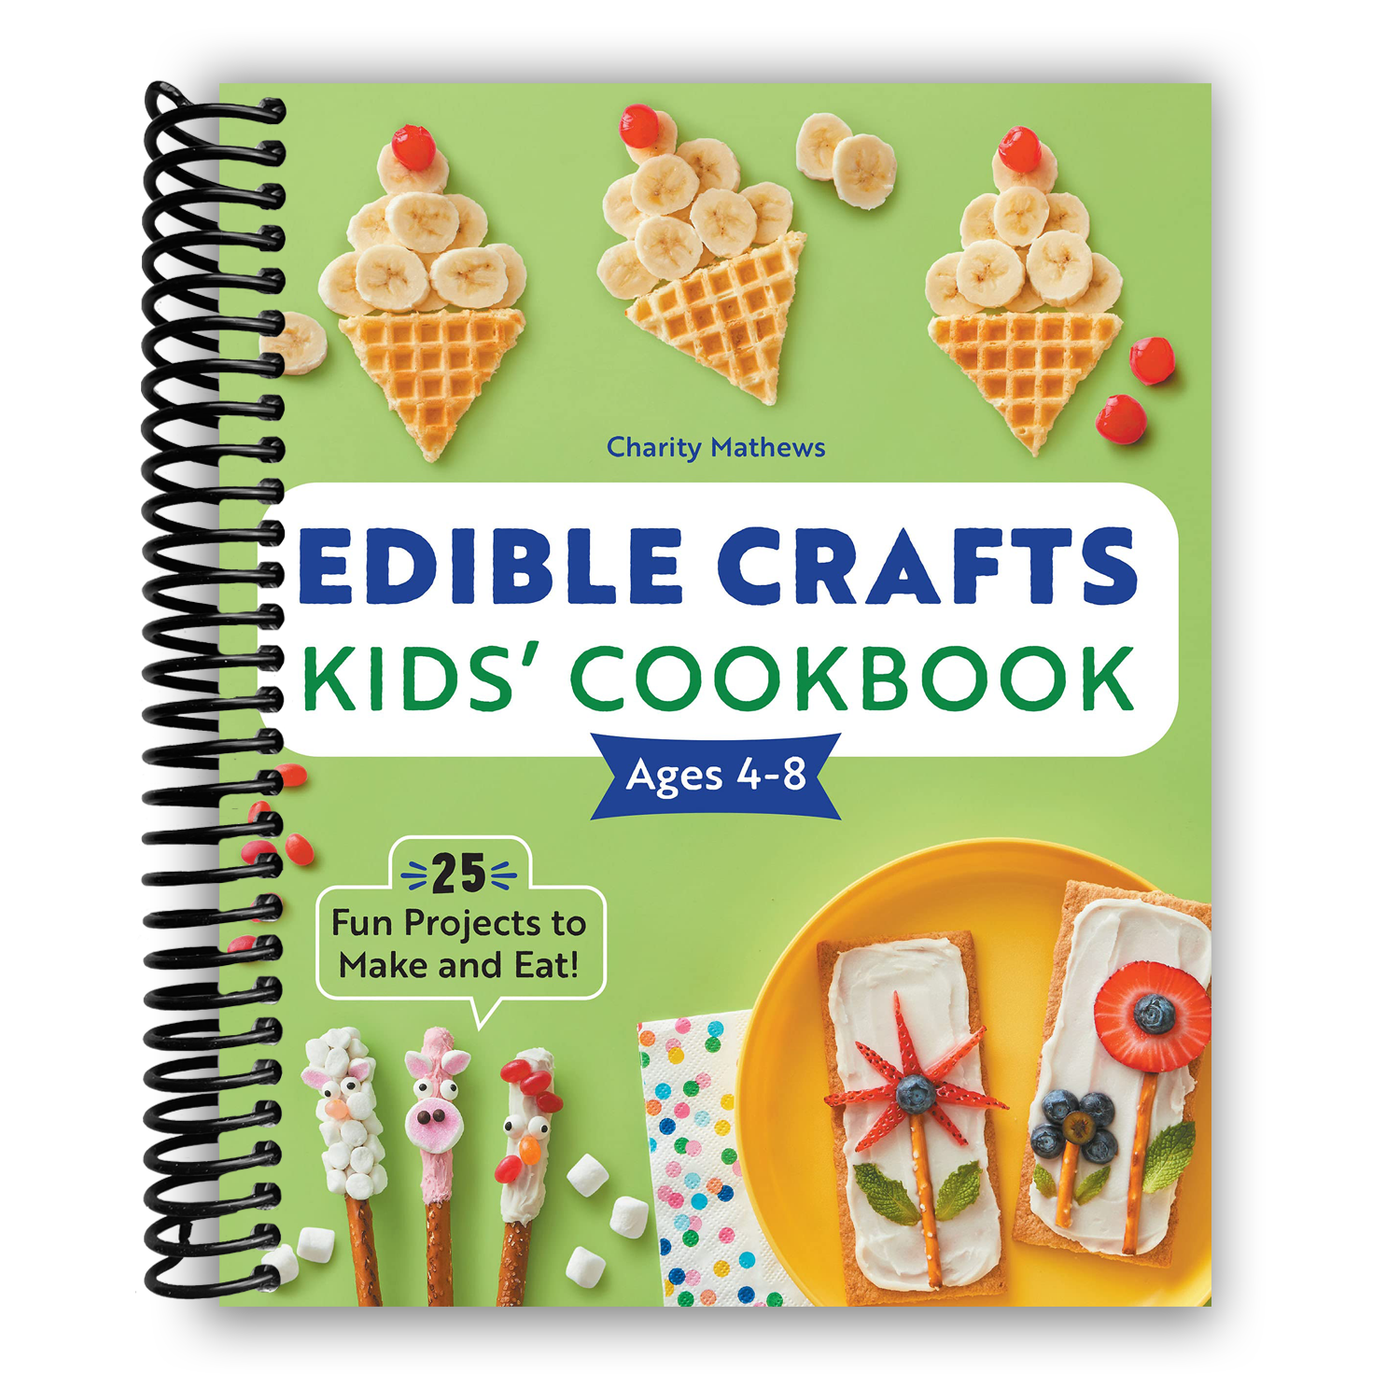 Edible Crafts Kids' Cookbook Ages 4-8: 25 Fun Projects to Make and Eat! (Spiral Bound)